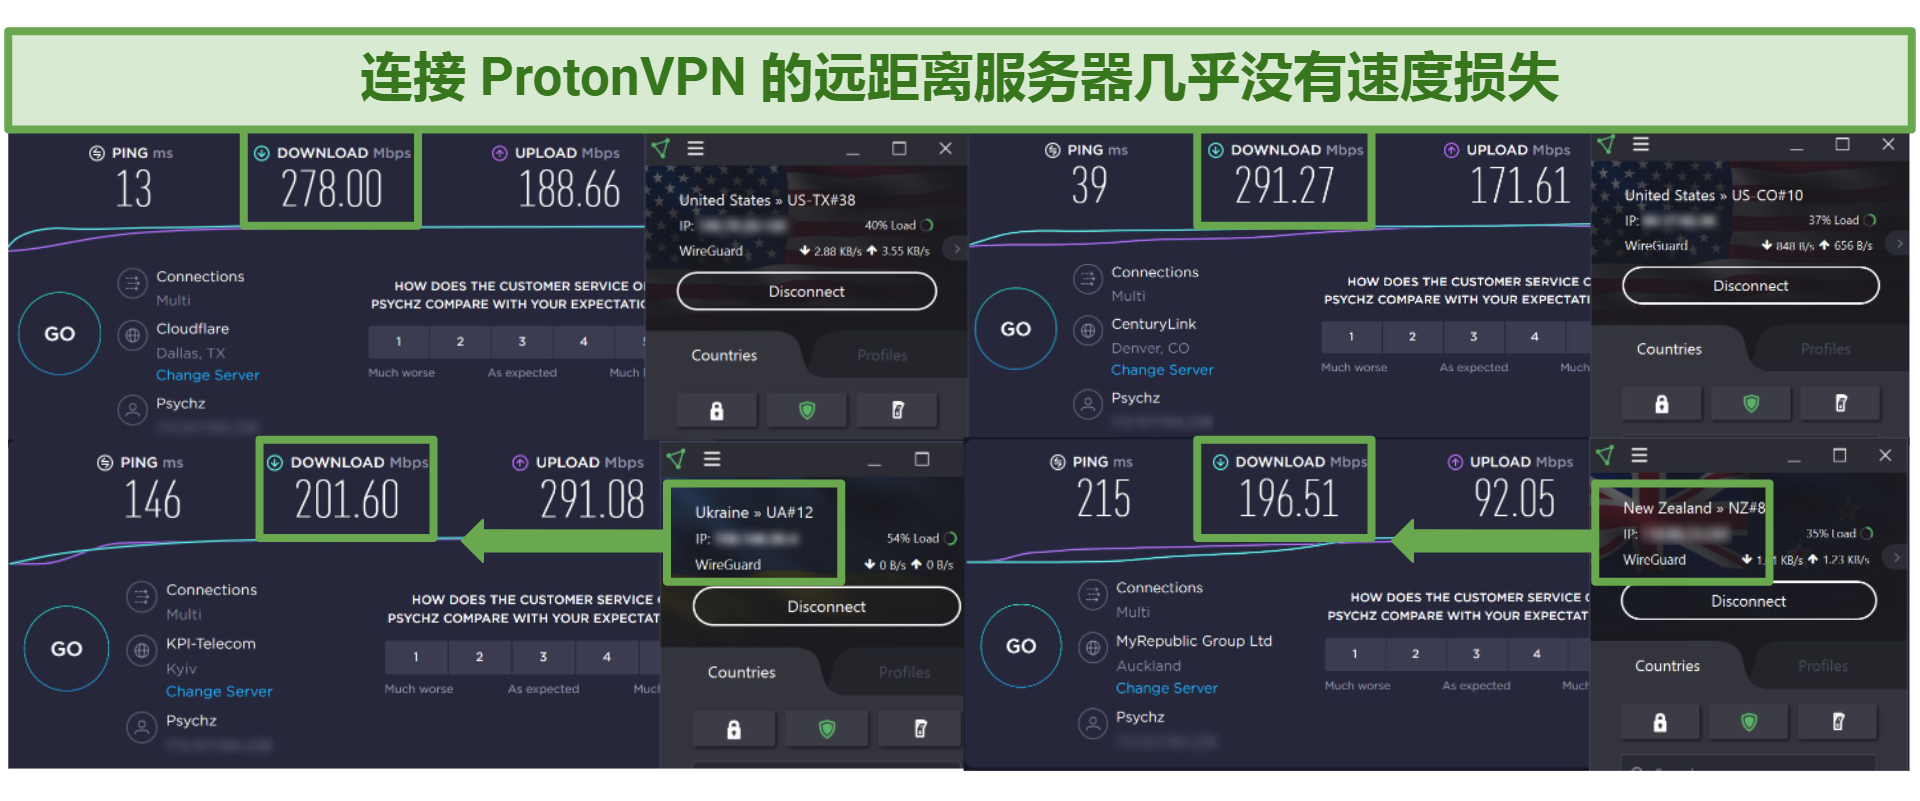 Speed test results using Proton VPN connected to 4 different server locations